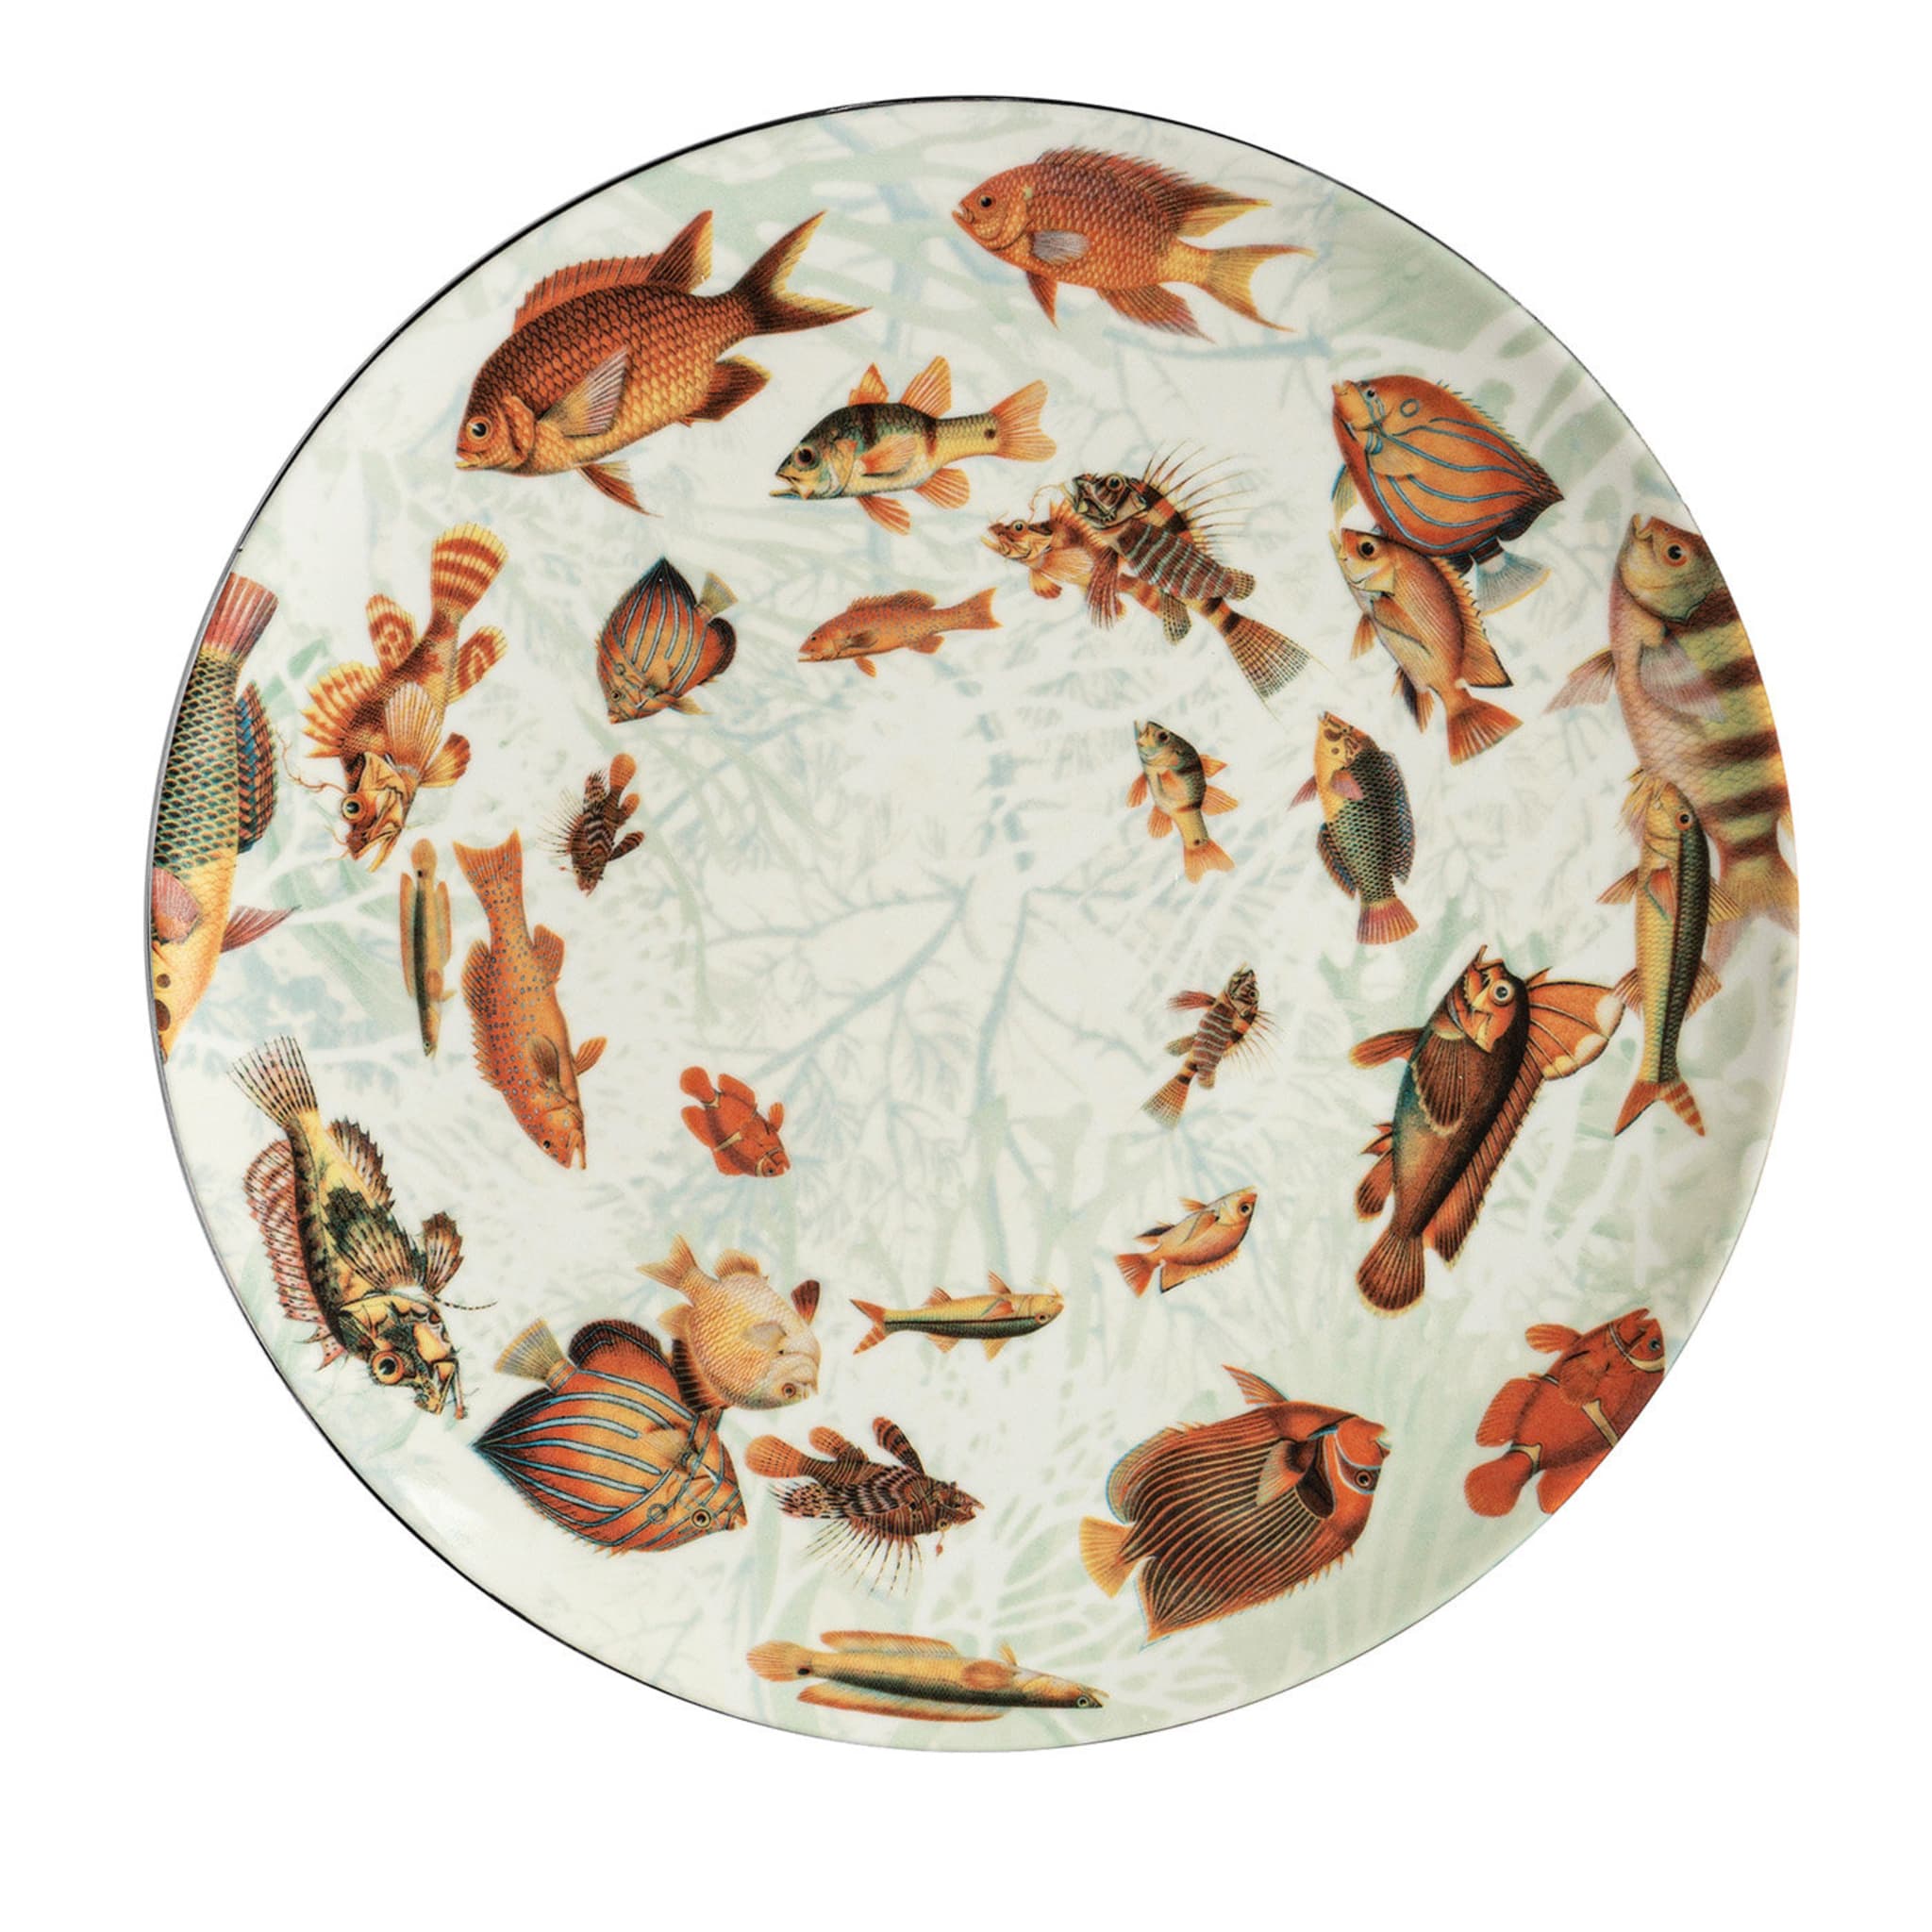 Amami Porcelain Dinner Plate With Tropical Fish #6 - Main view